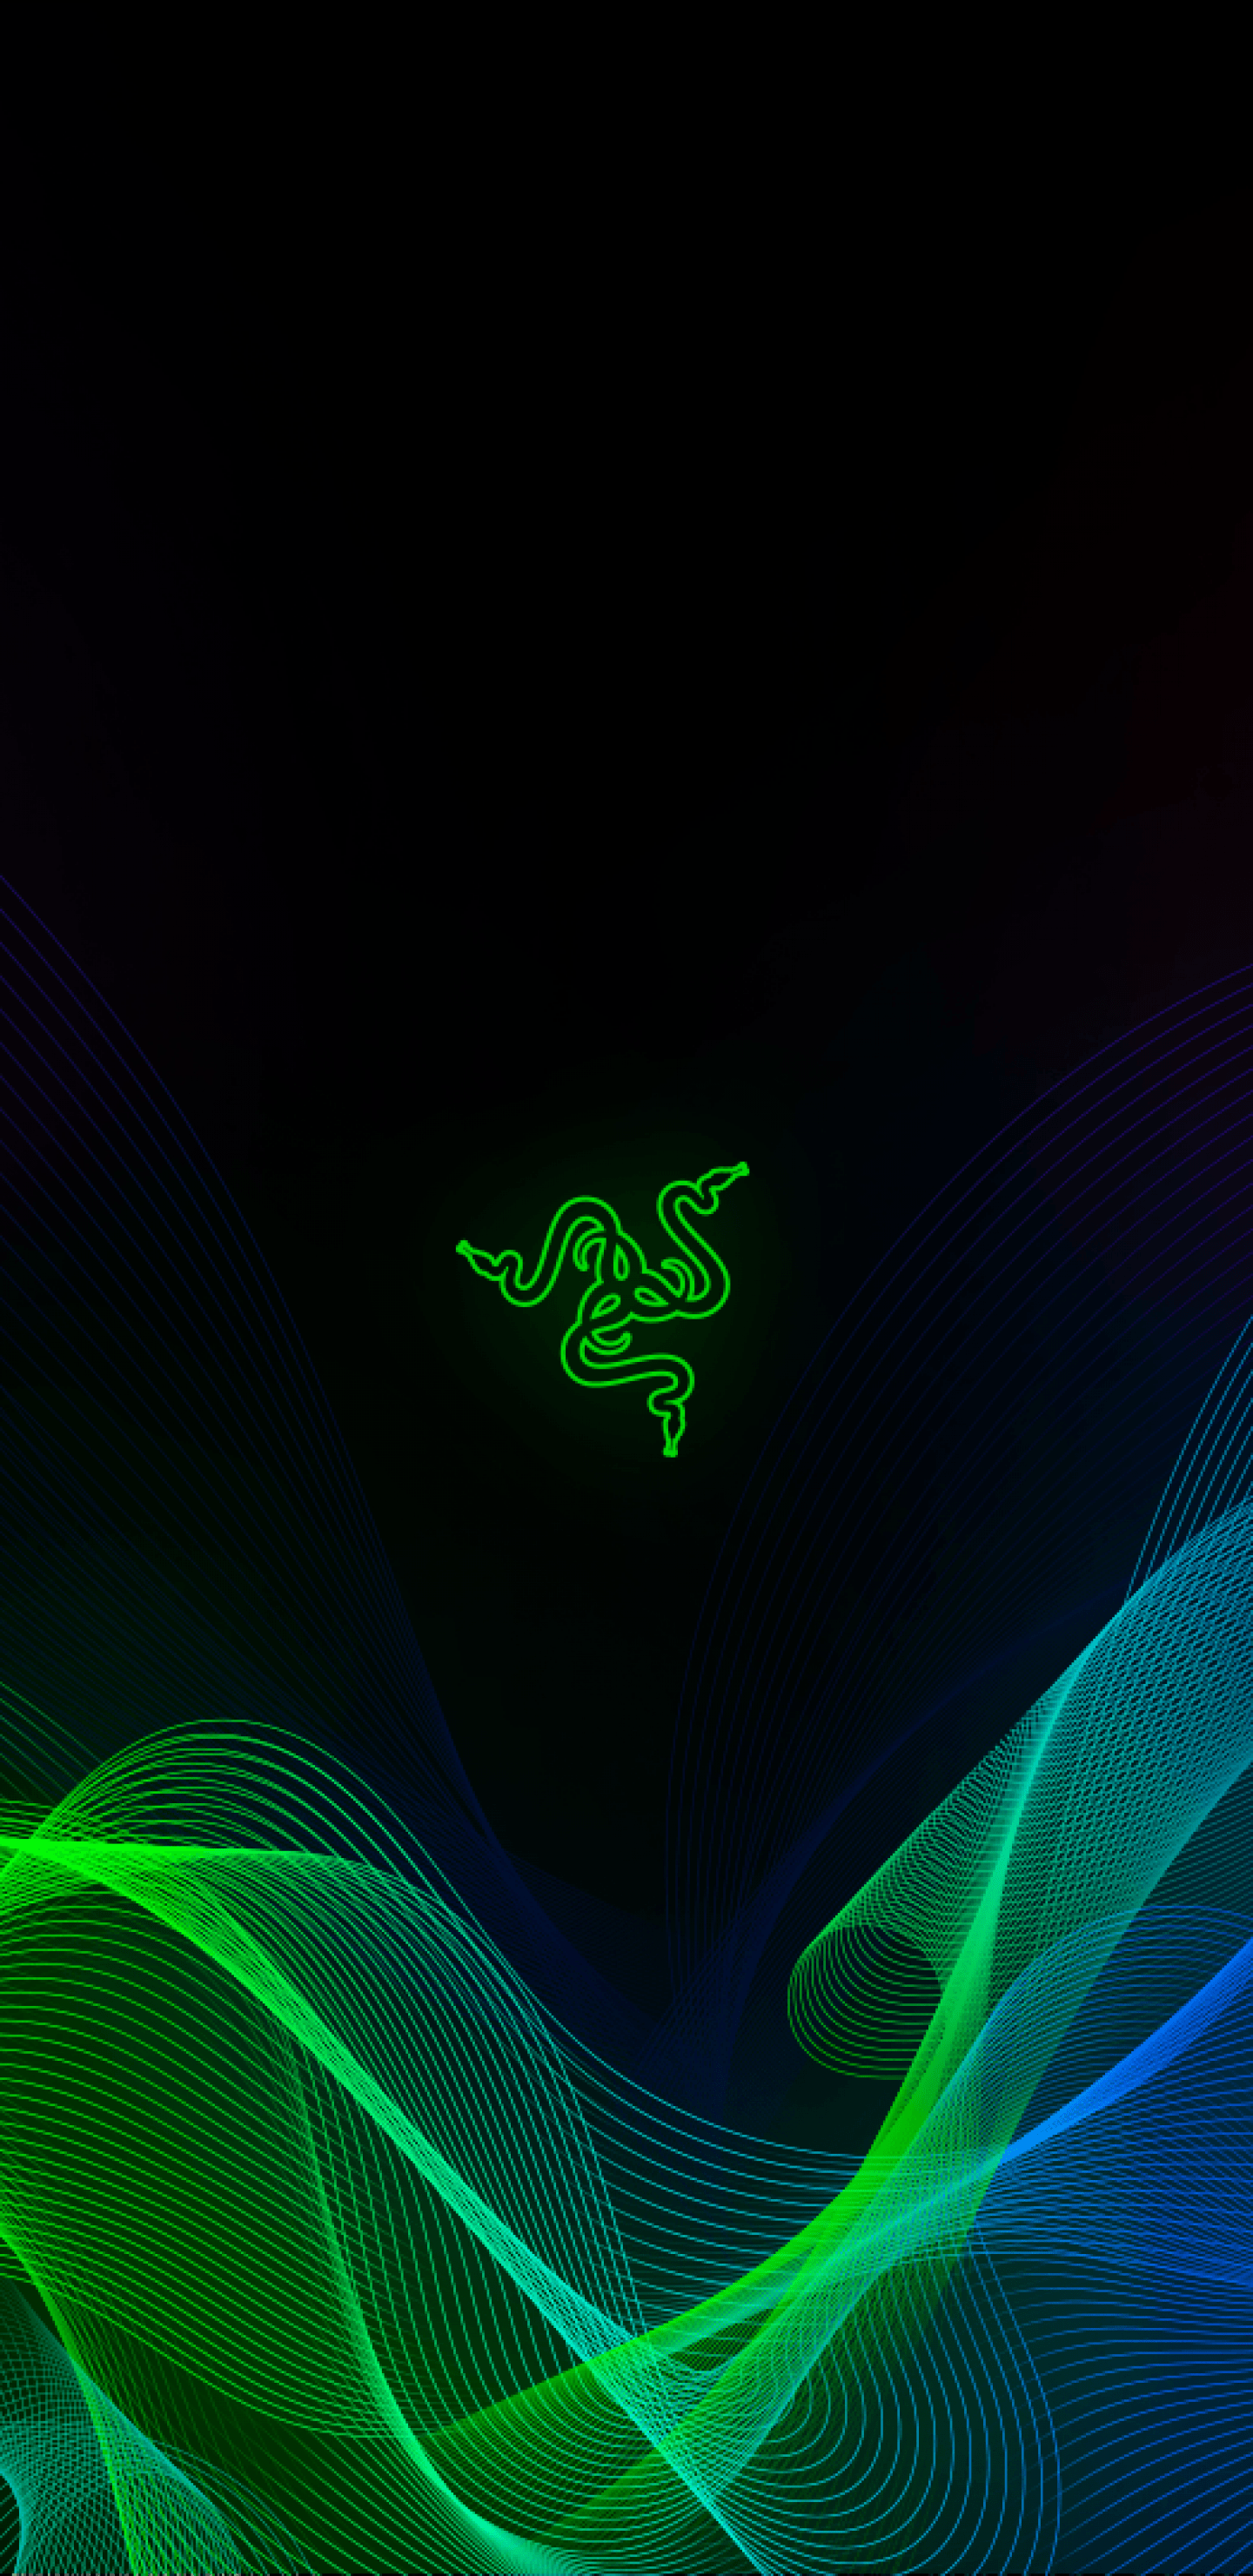 Download 1440x2960 Razer, Abstract, Waves, Sync Wallpaper